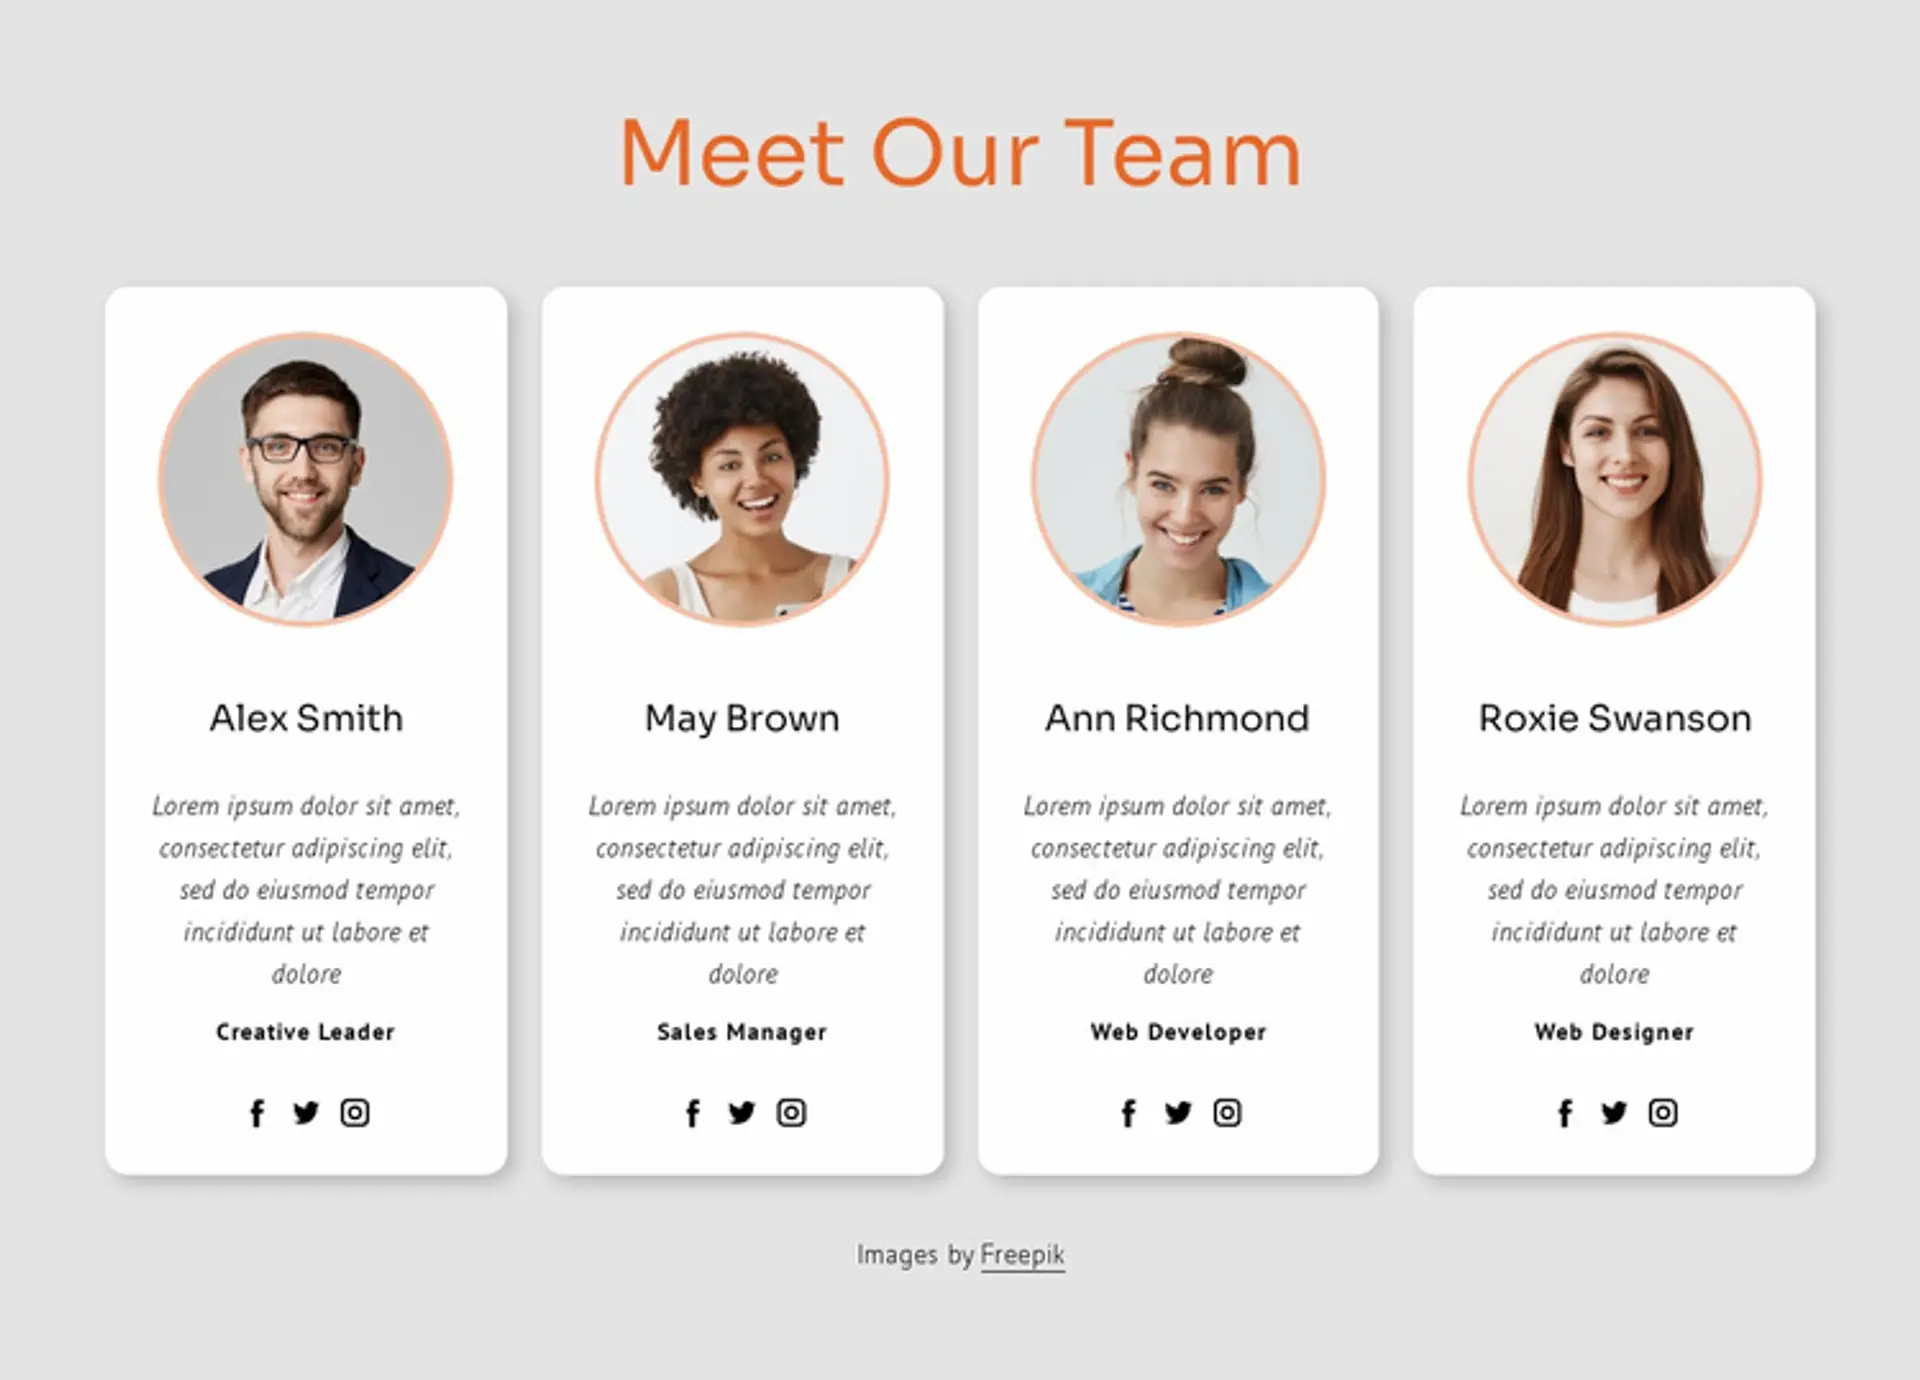 Don’t just add mugshots. Say something cool about your team members. 